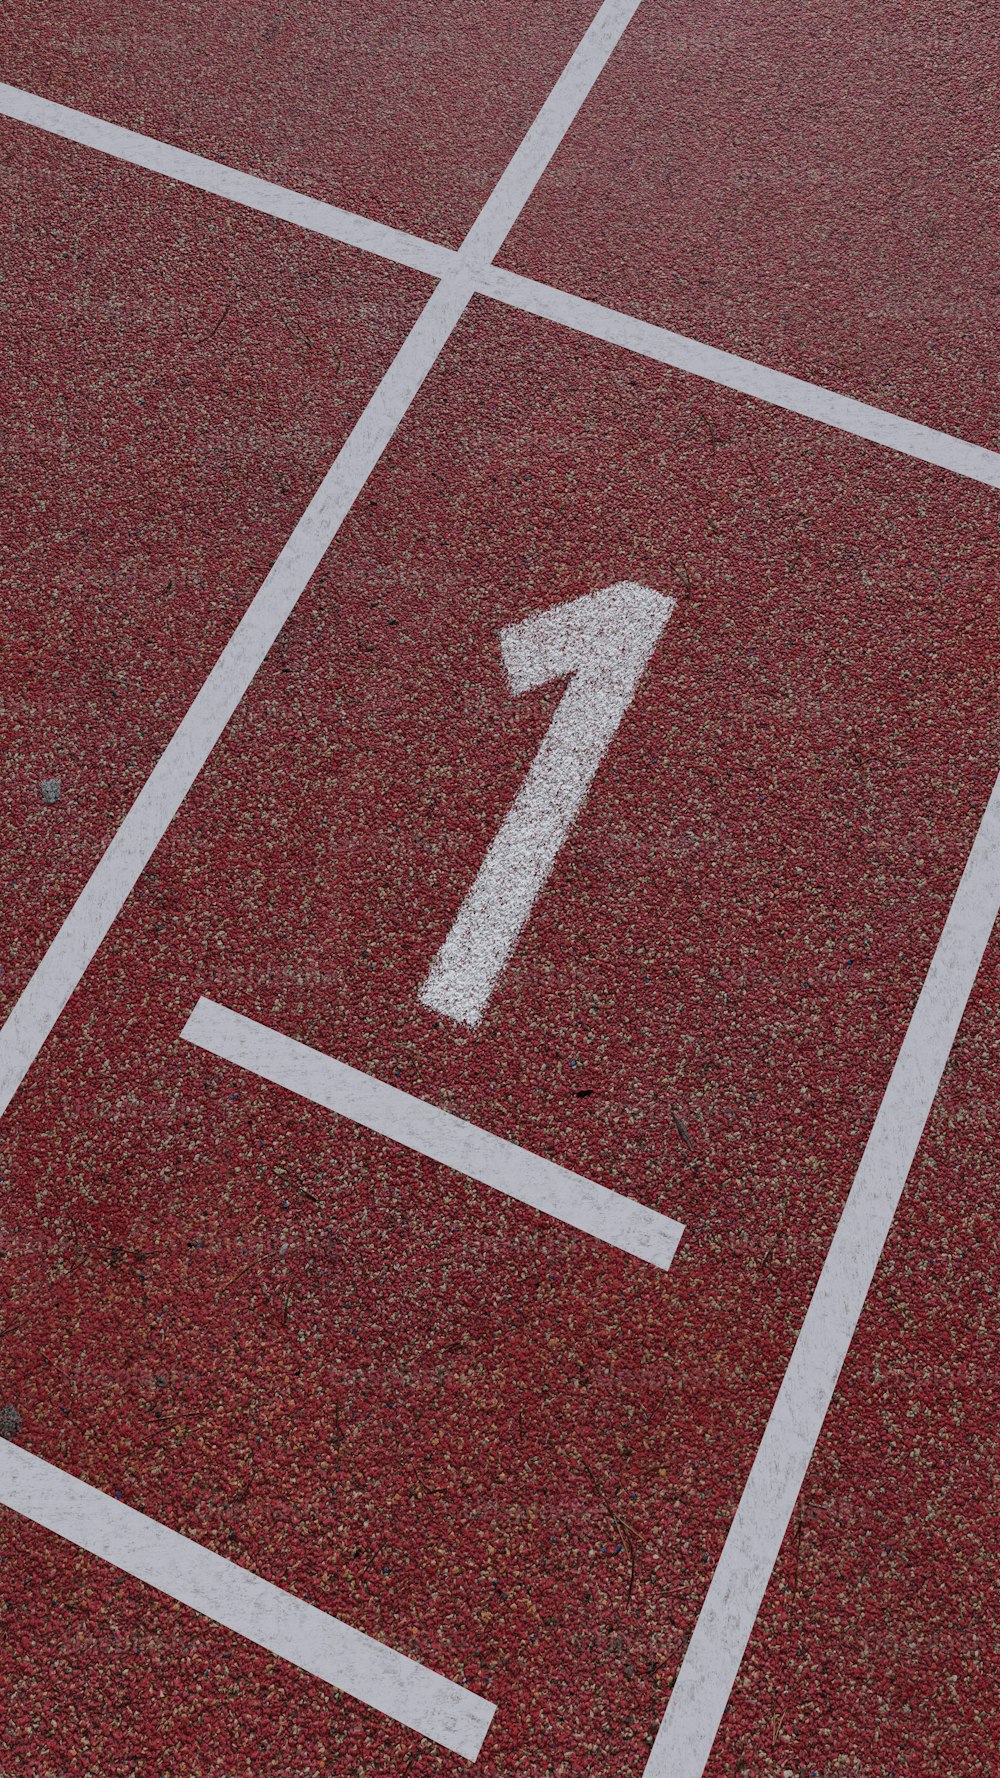 a number one painted on a tennis court